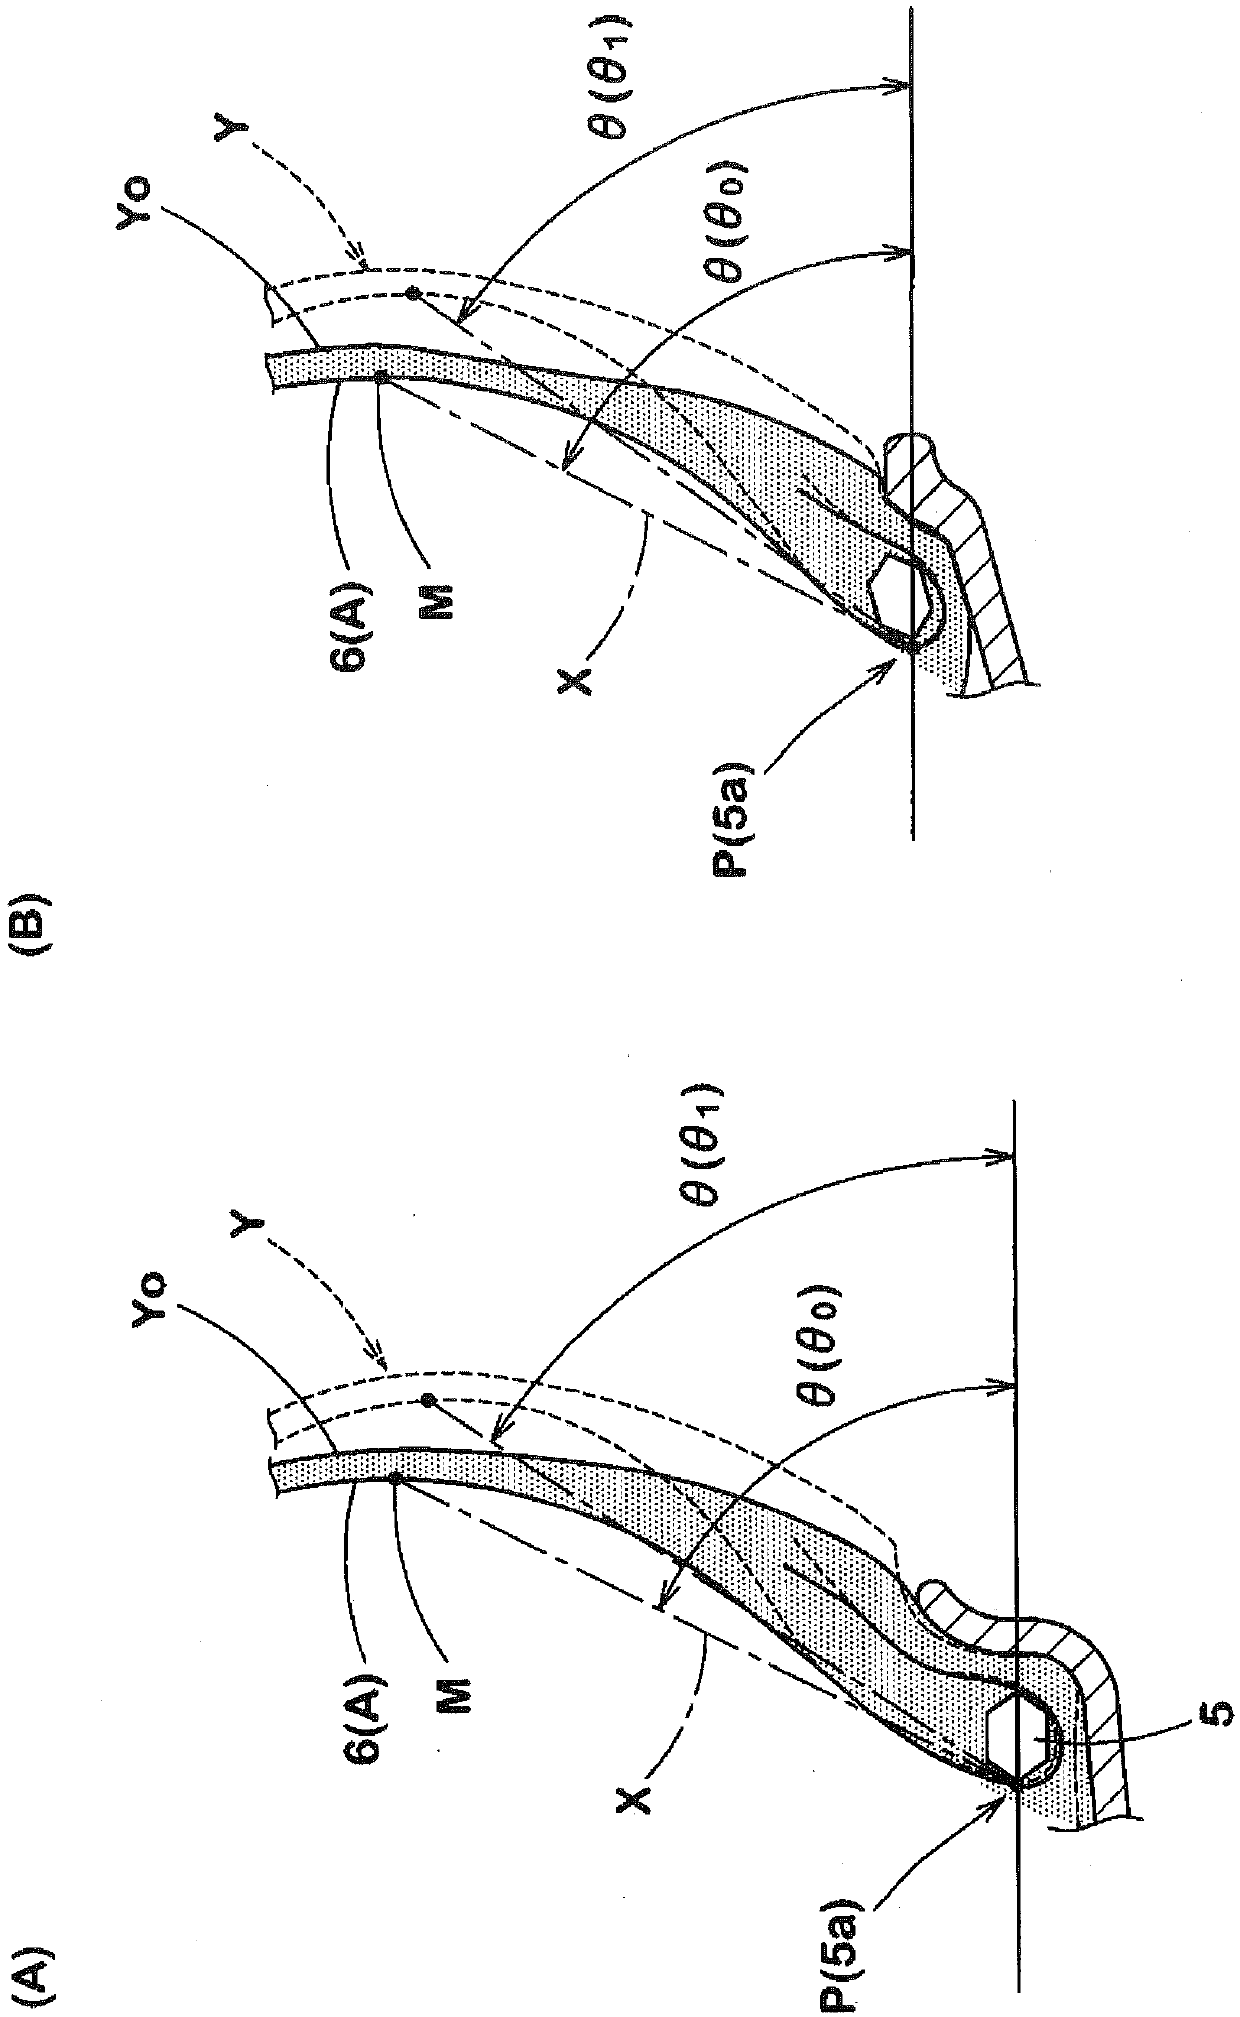 Method for evaluating carcass durability of bead portion of heavy-duty tire